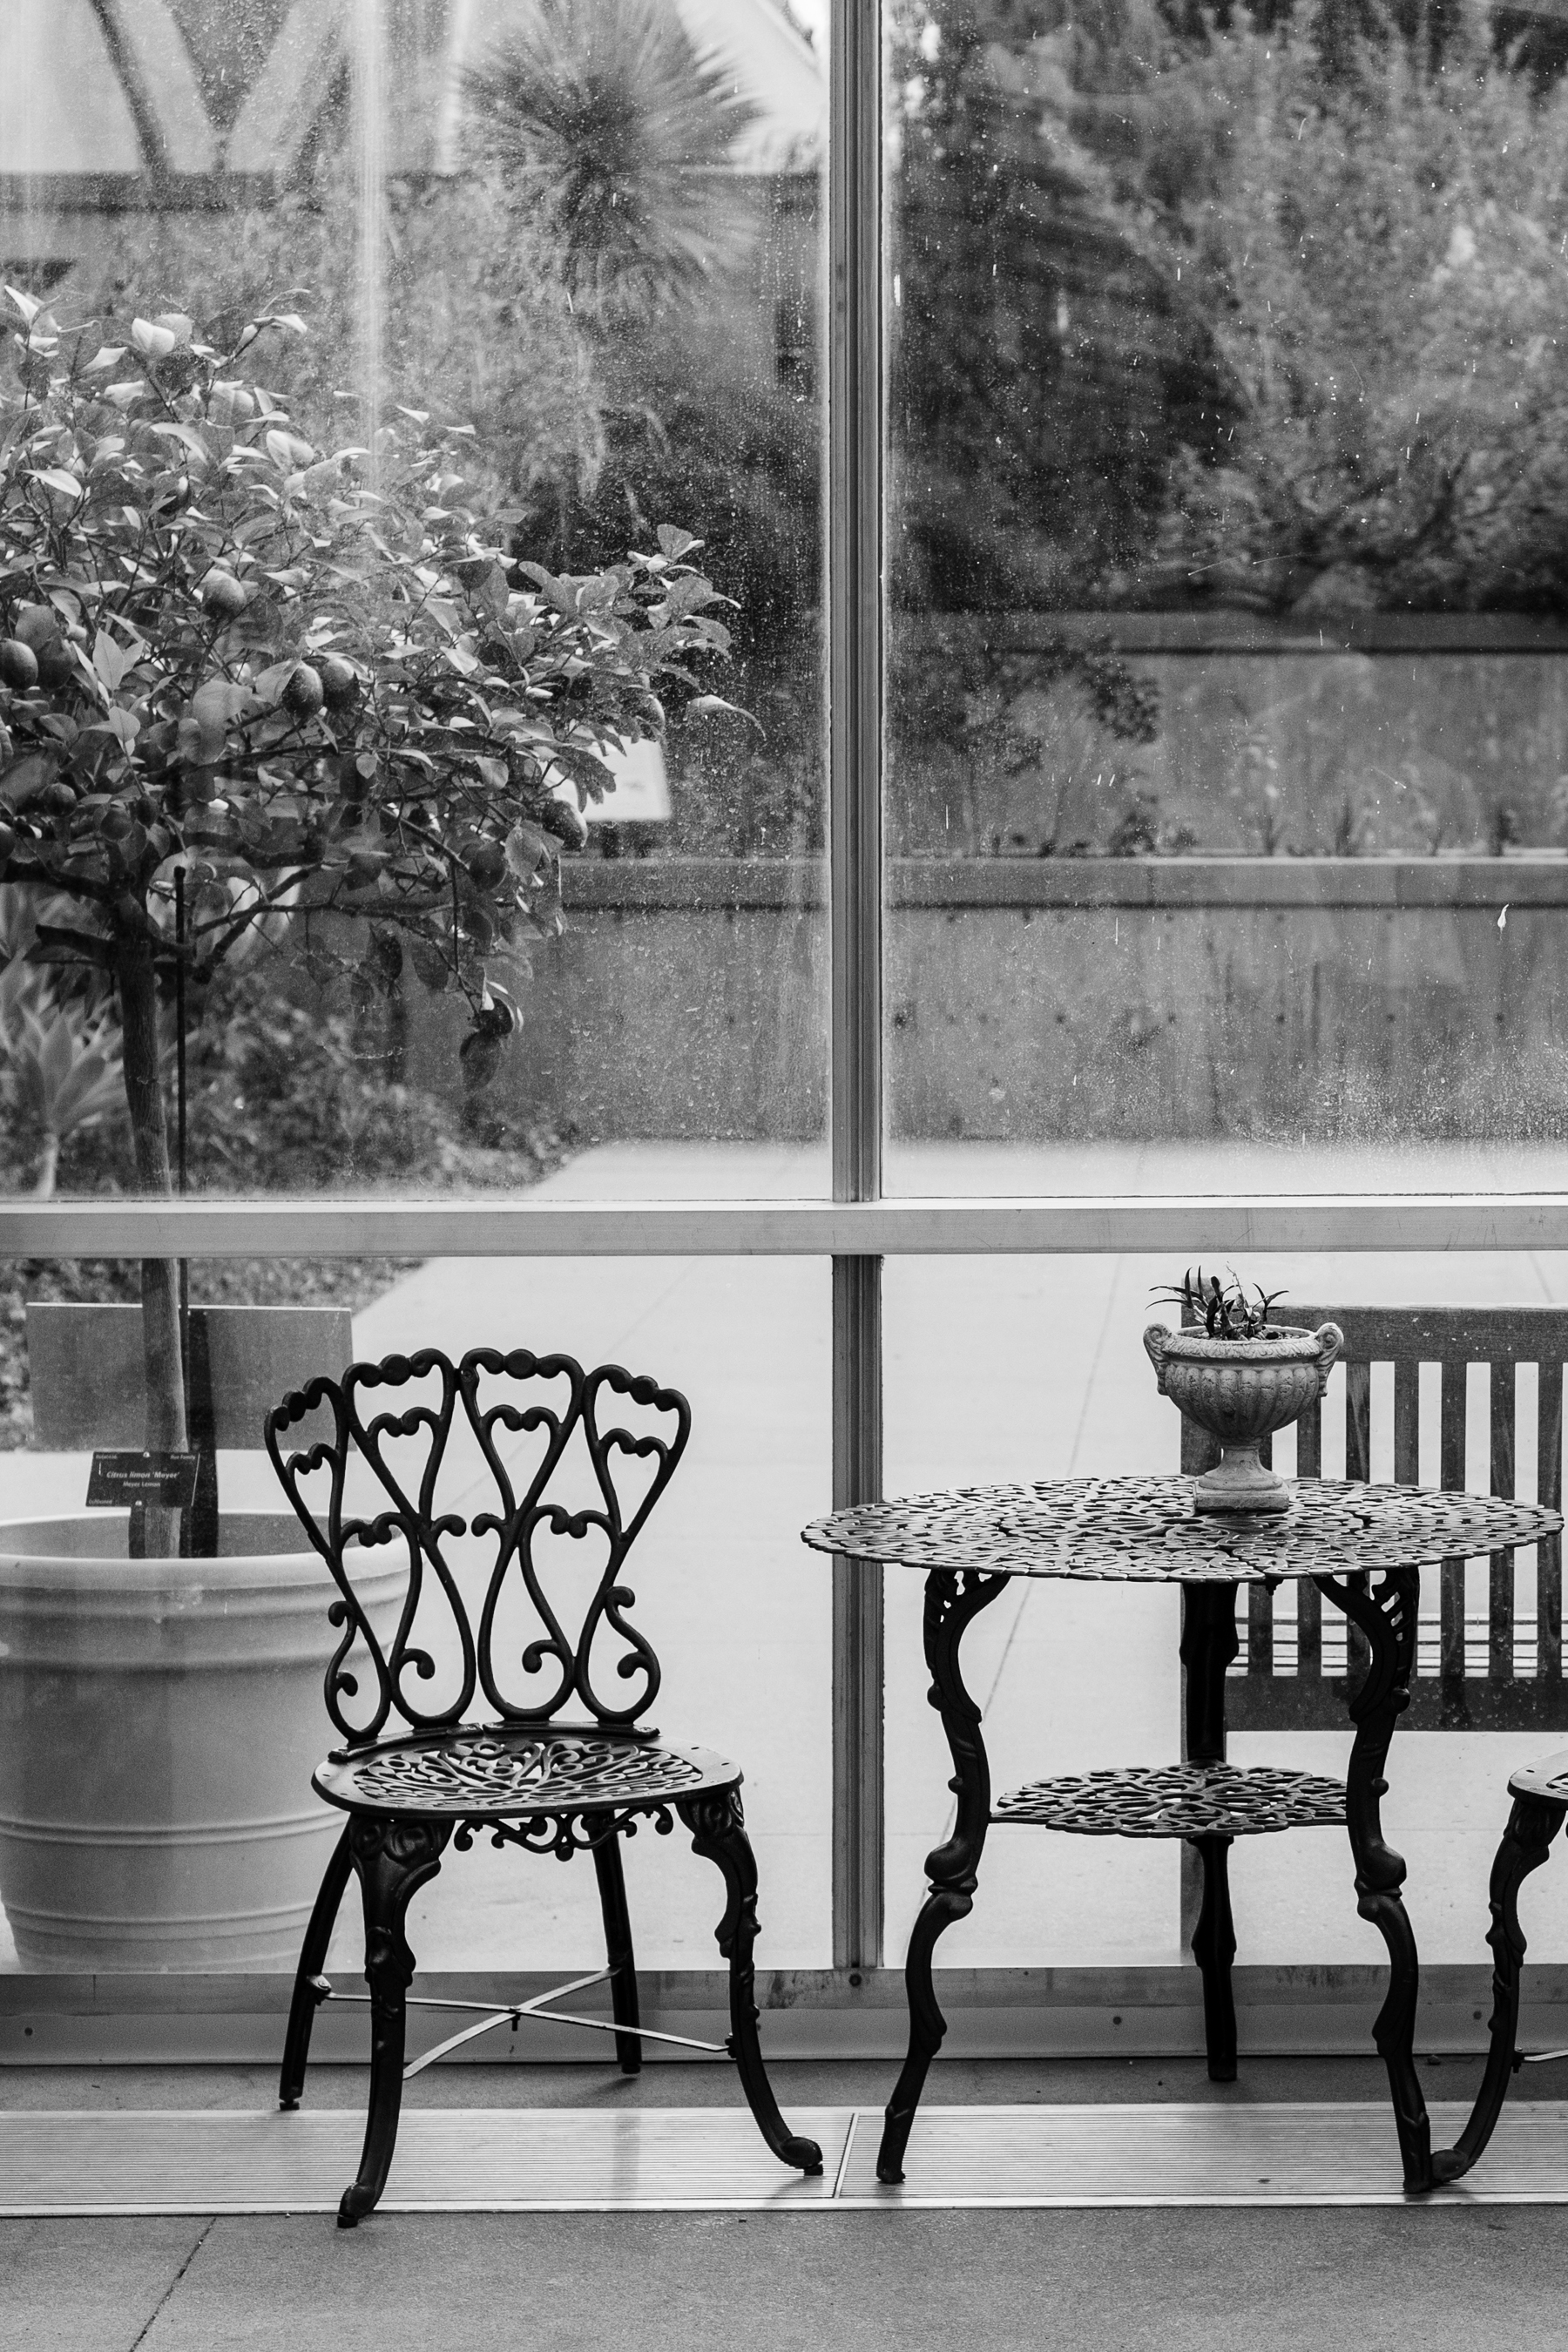 Black and white cafe set in a greenhouse photographic print by photographer Brenda Landrum of Colorado